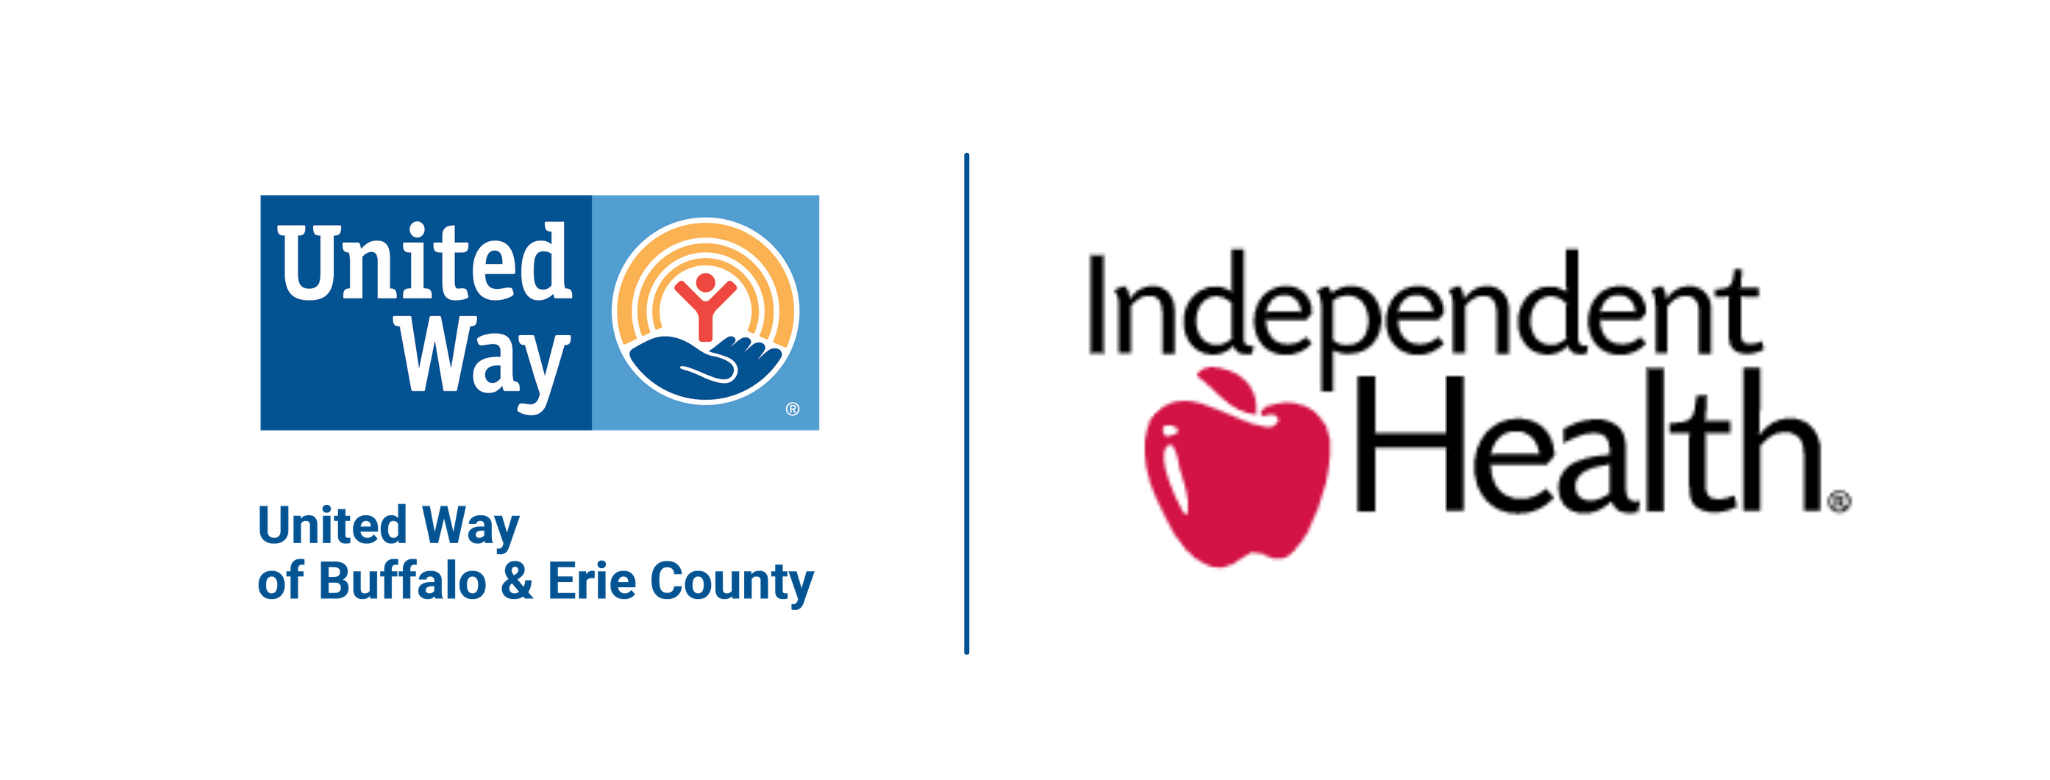 United Way and Independent Health logos